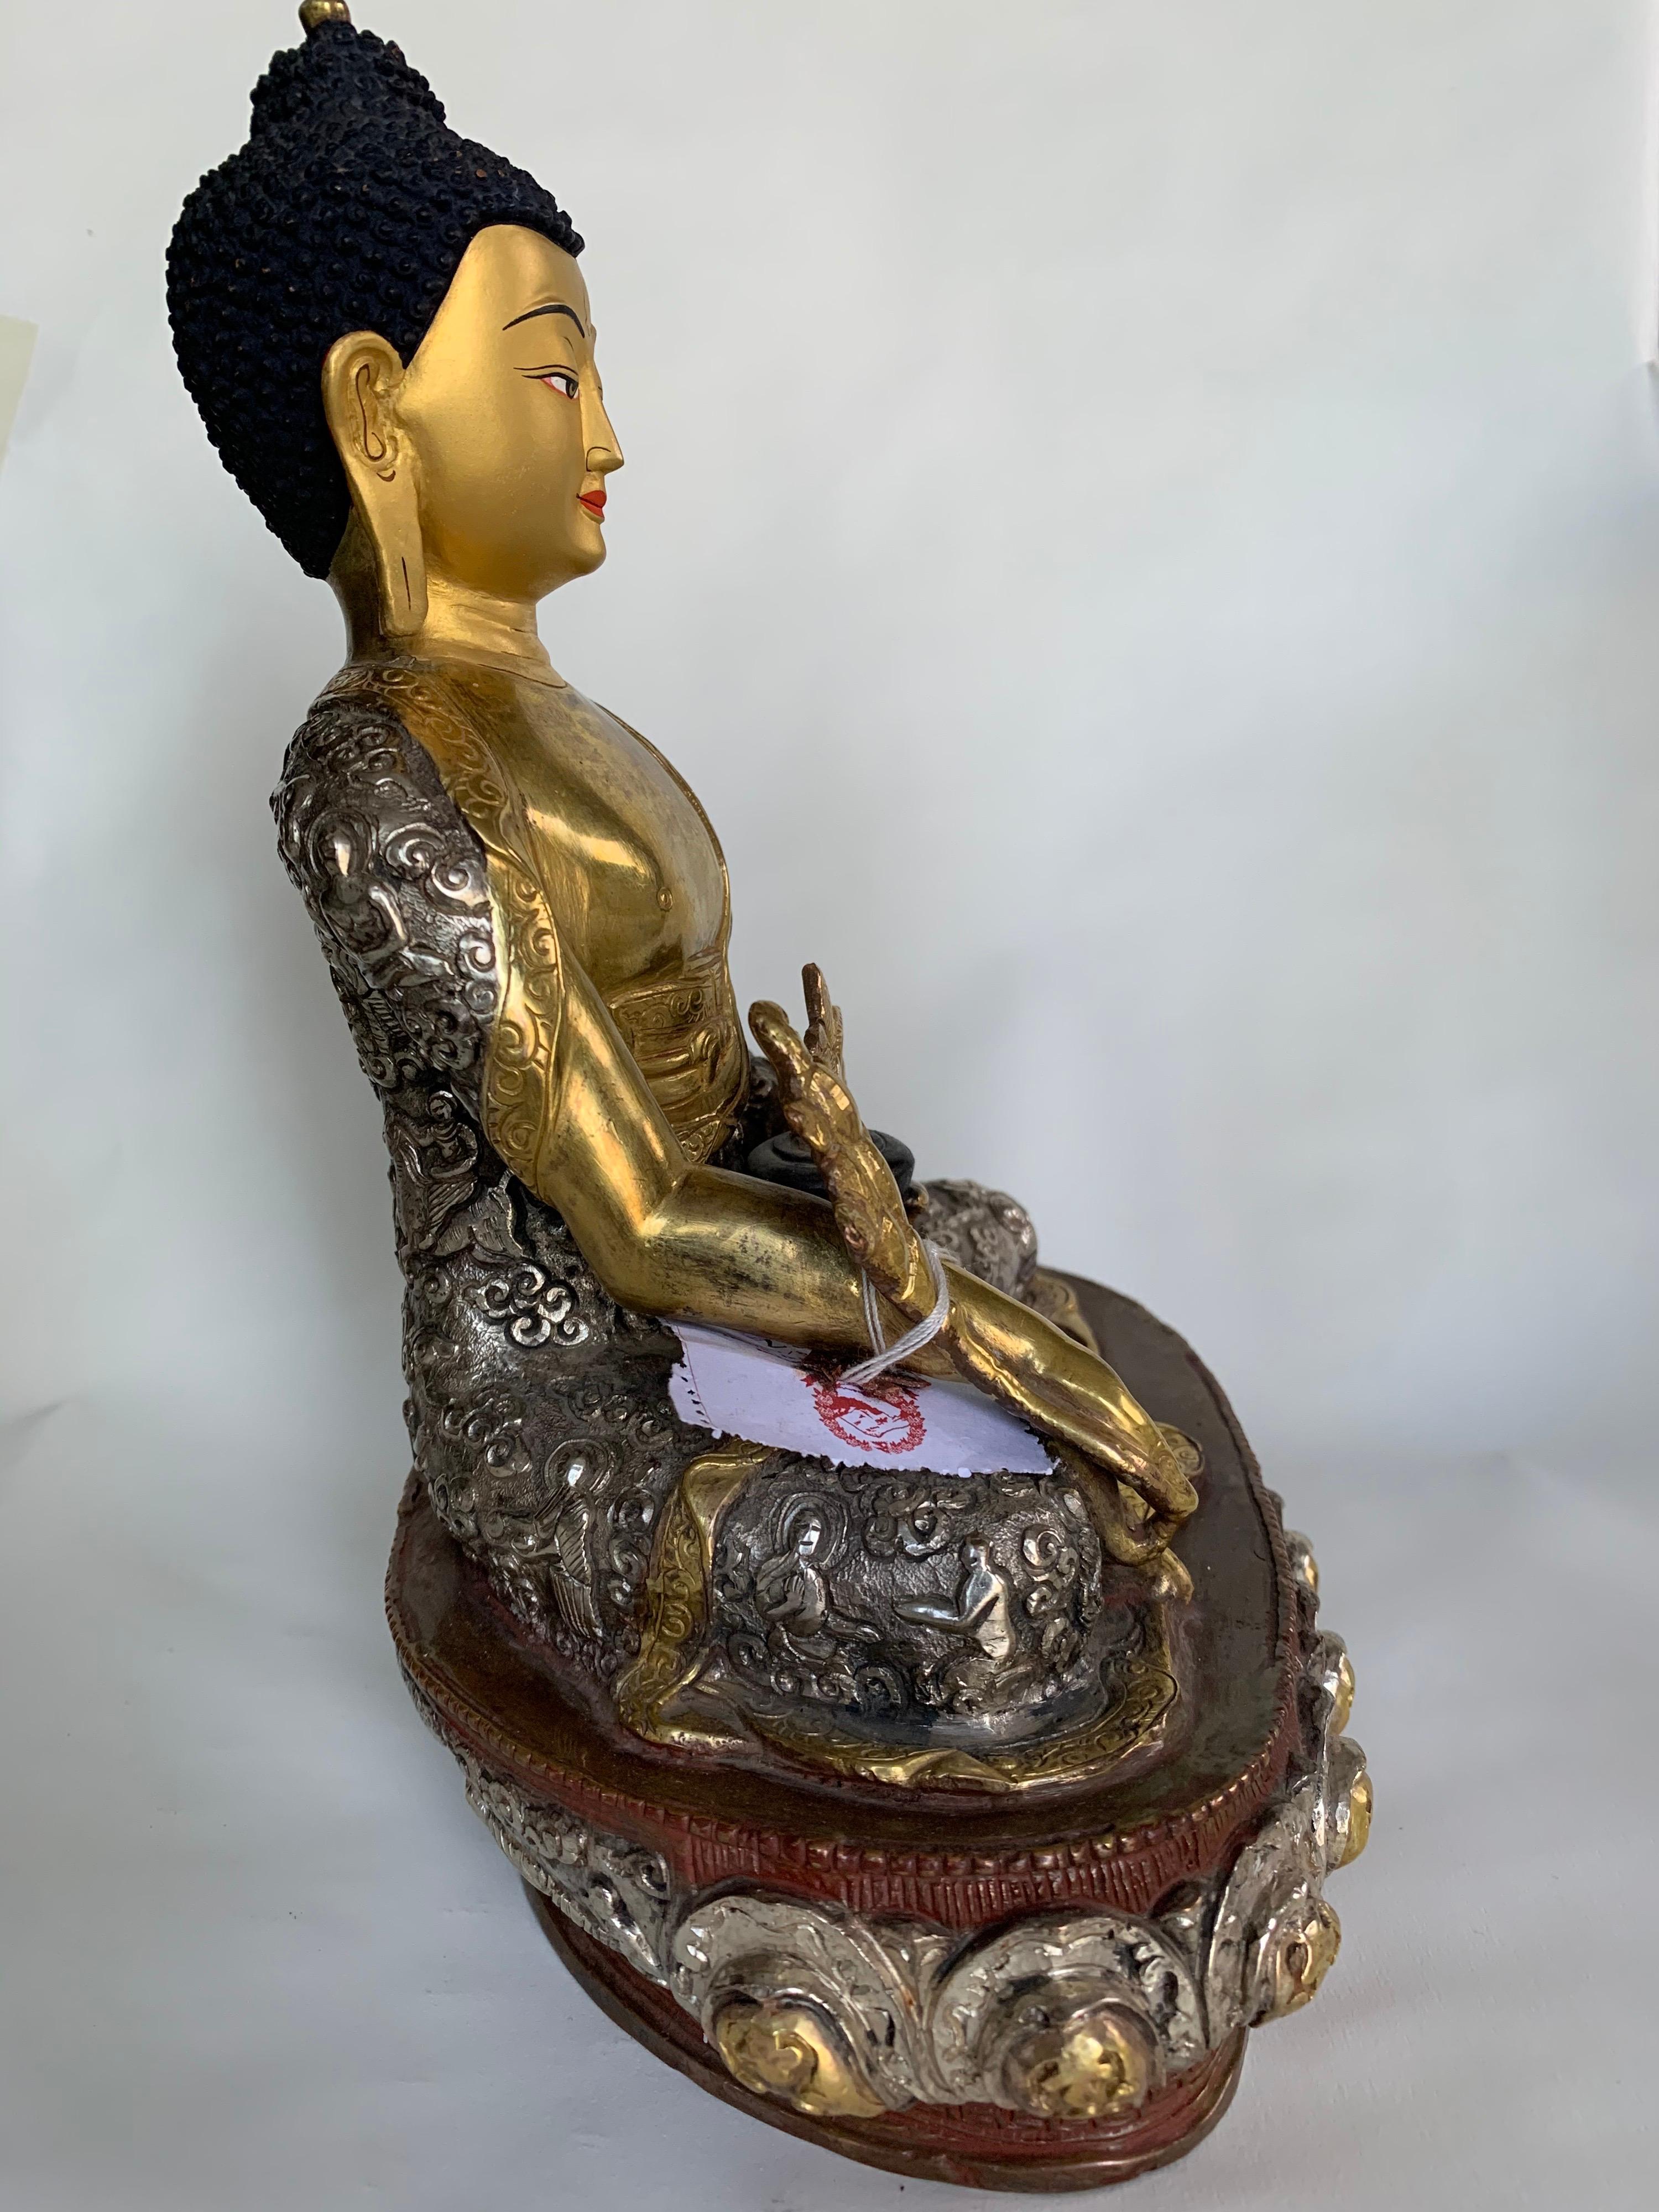 This statue is handcrafted by lost wax process which is one of the ancient process of metal craft. Medicine History Buddha is seated in 